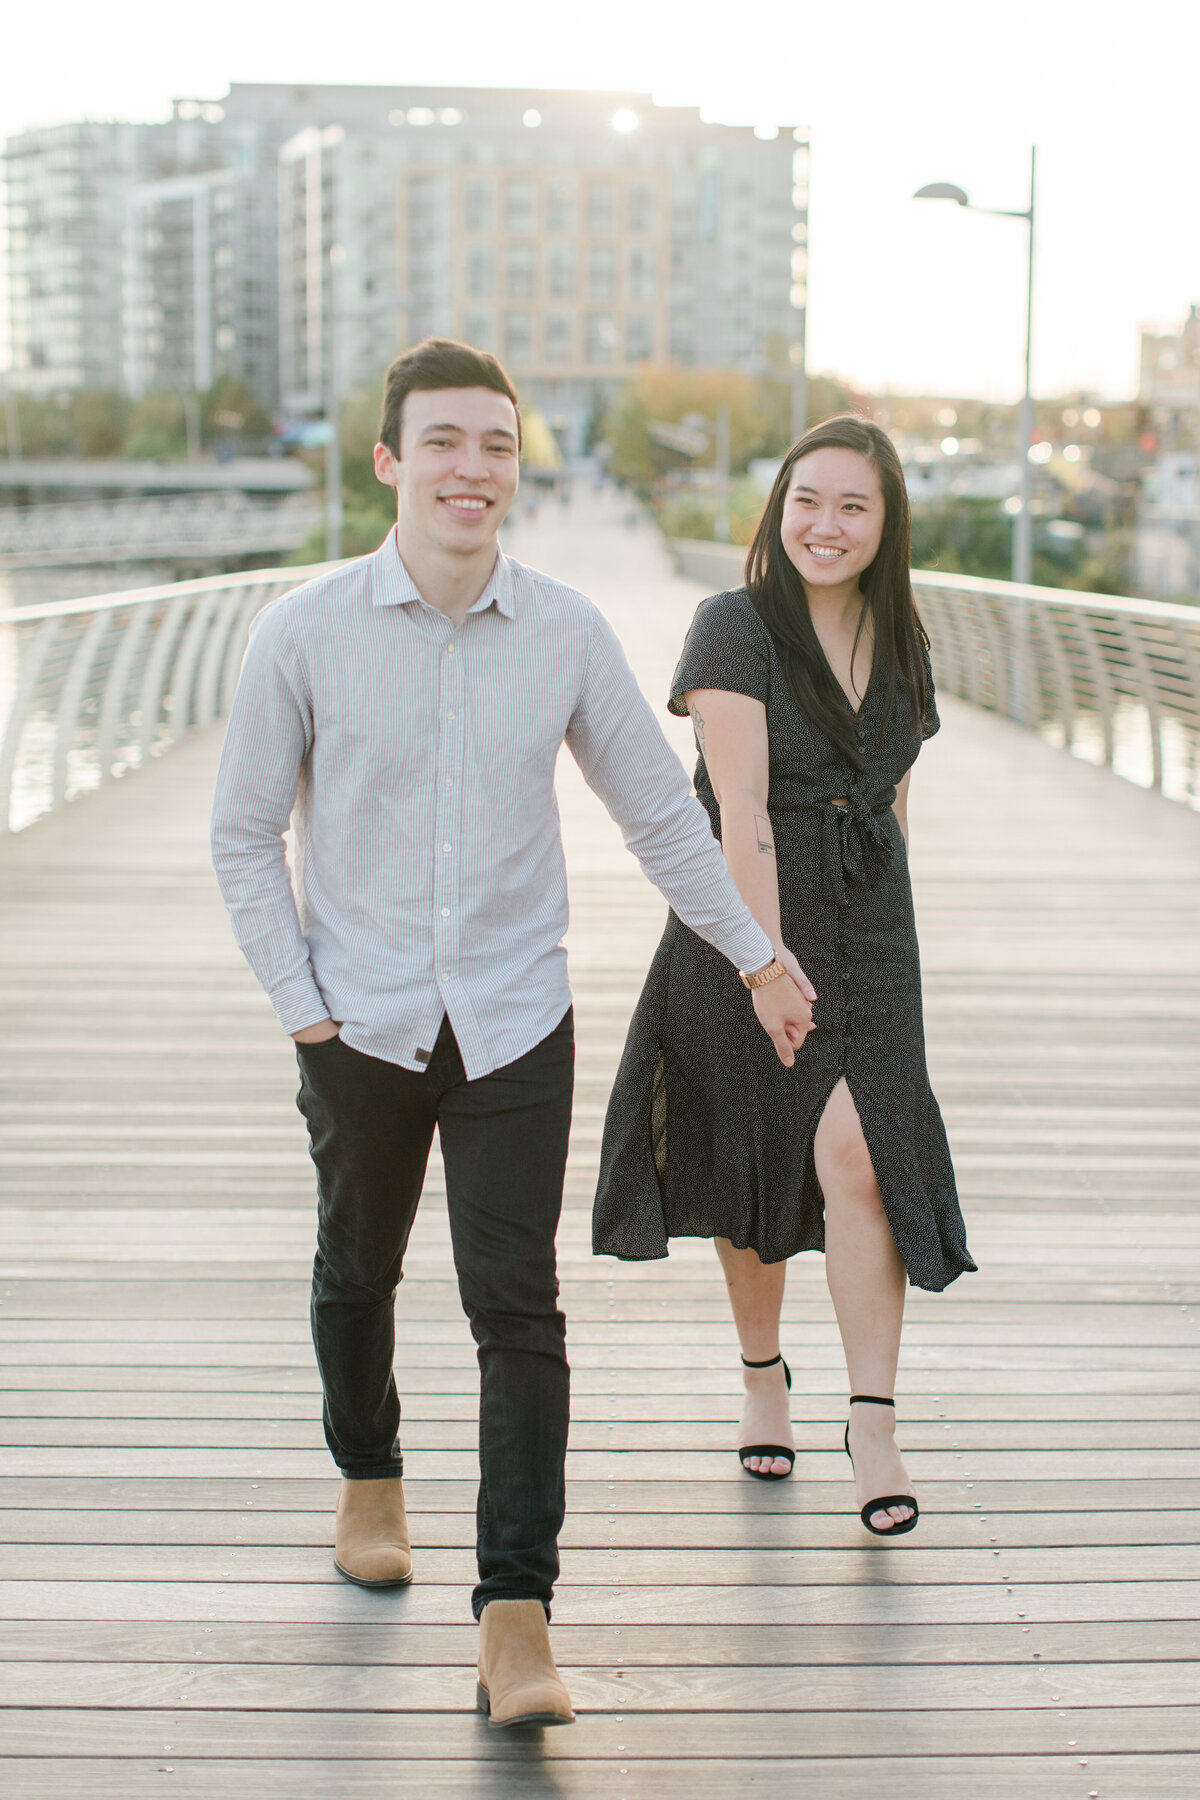 Becky_Collin_Navy_Yards_Park_The_Wharf_Washington_DC_Fall_Engagement_Session_AngelikaJohnsPhotography-7789